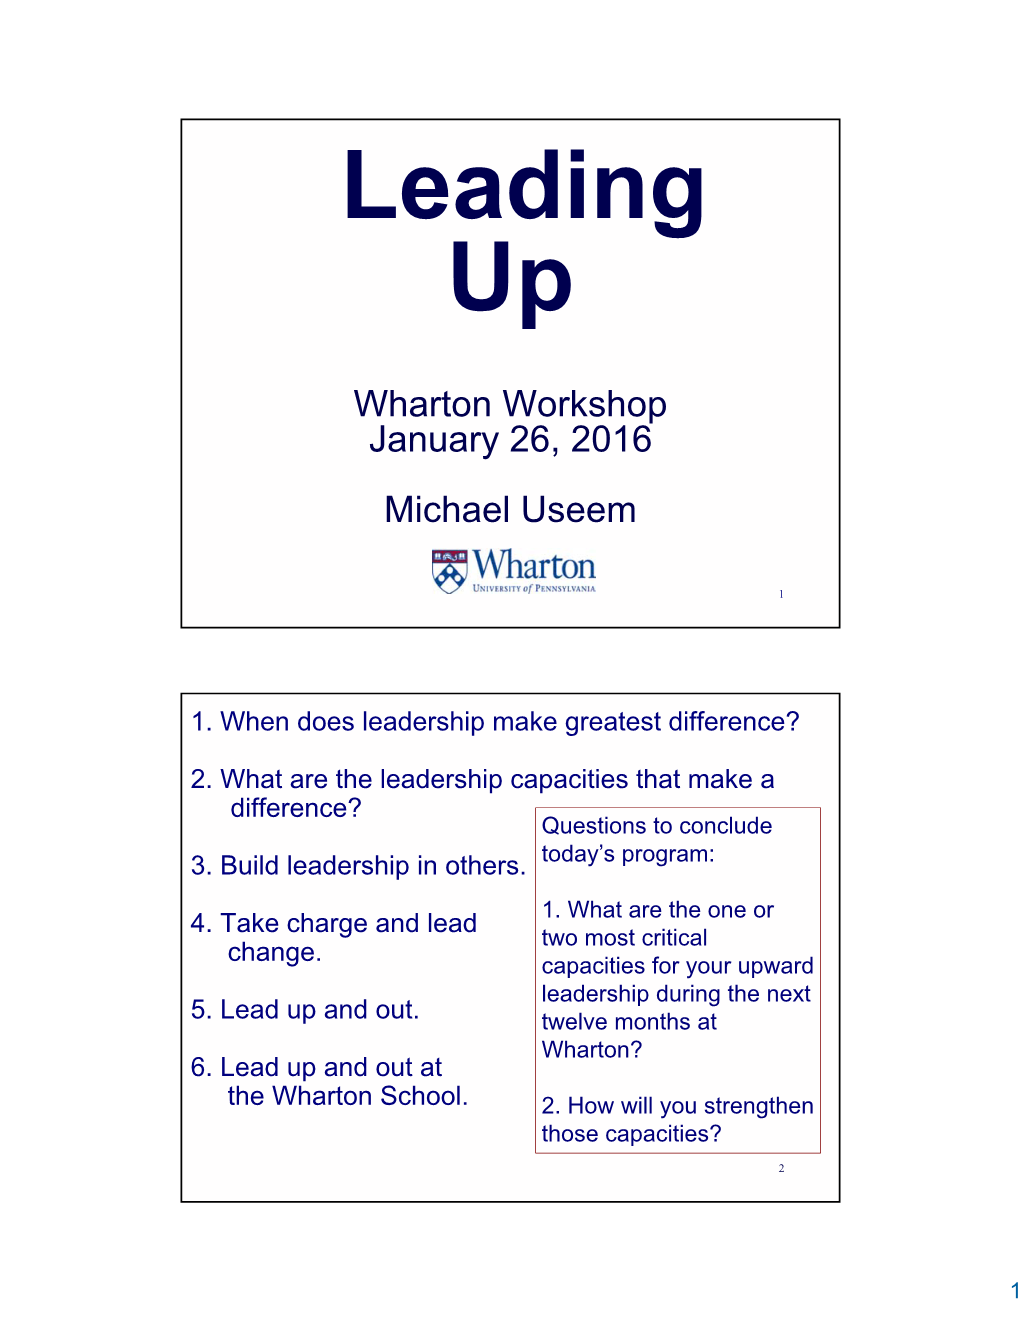 Leading Up: by Michael Useem